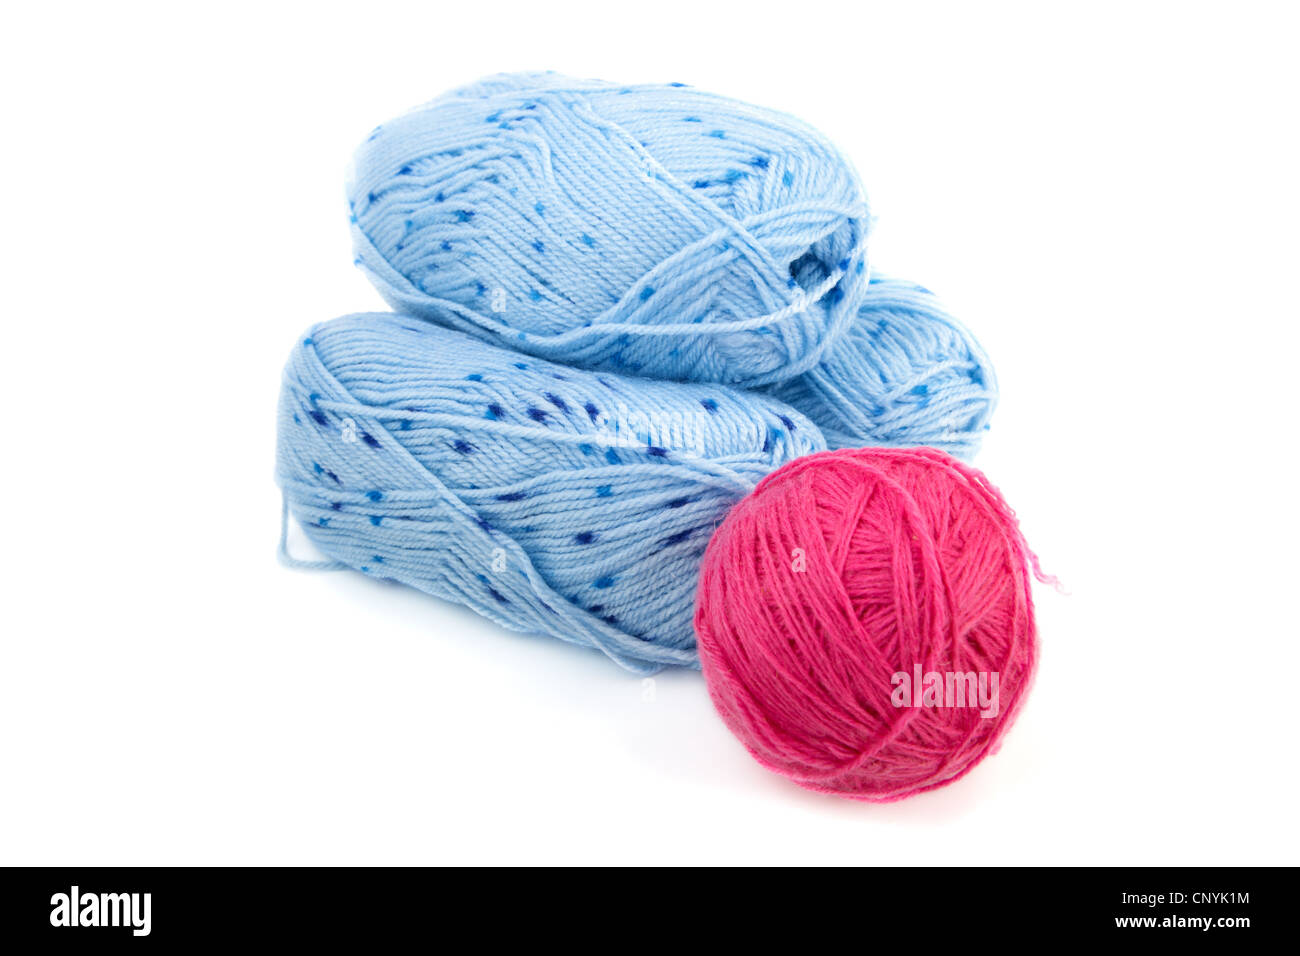 Balls of threads for knitting isolated on a white background Stock Photo